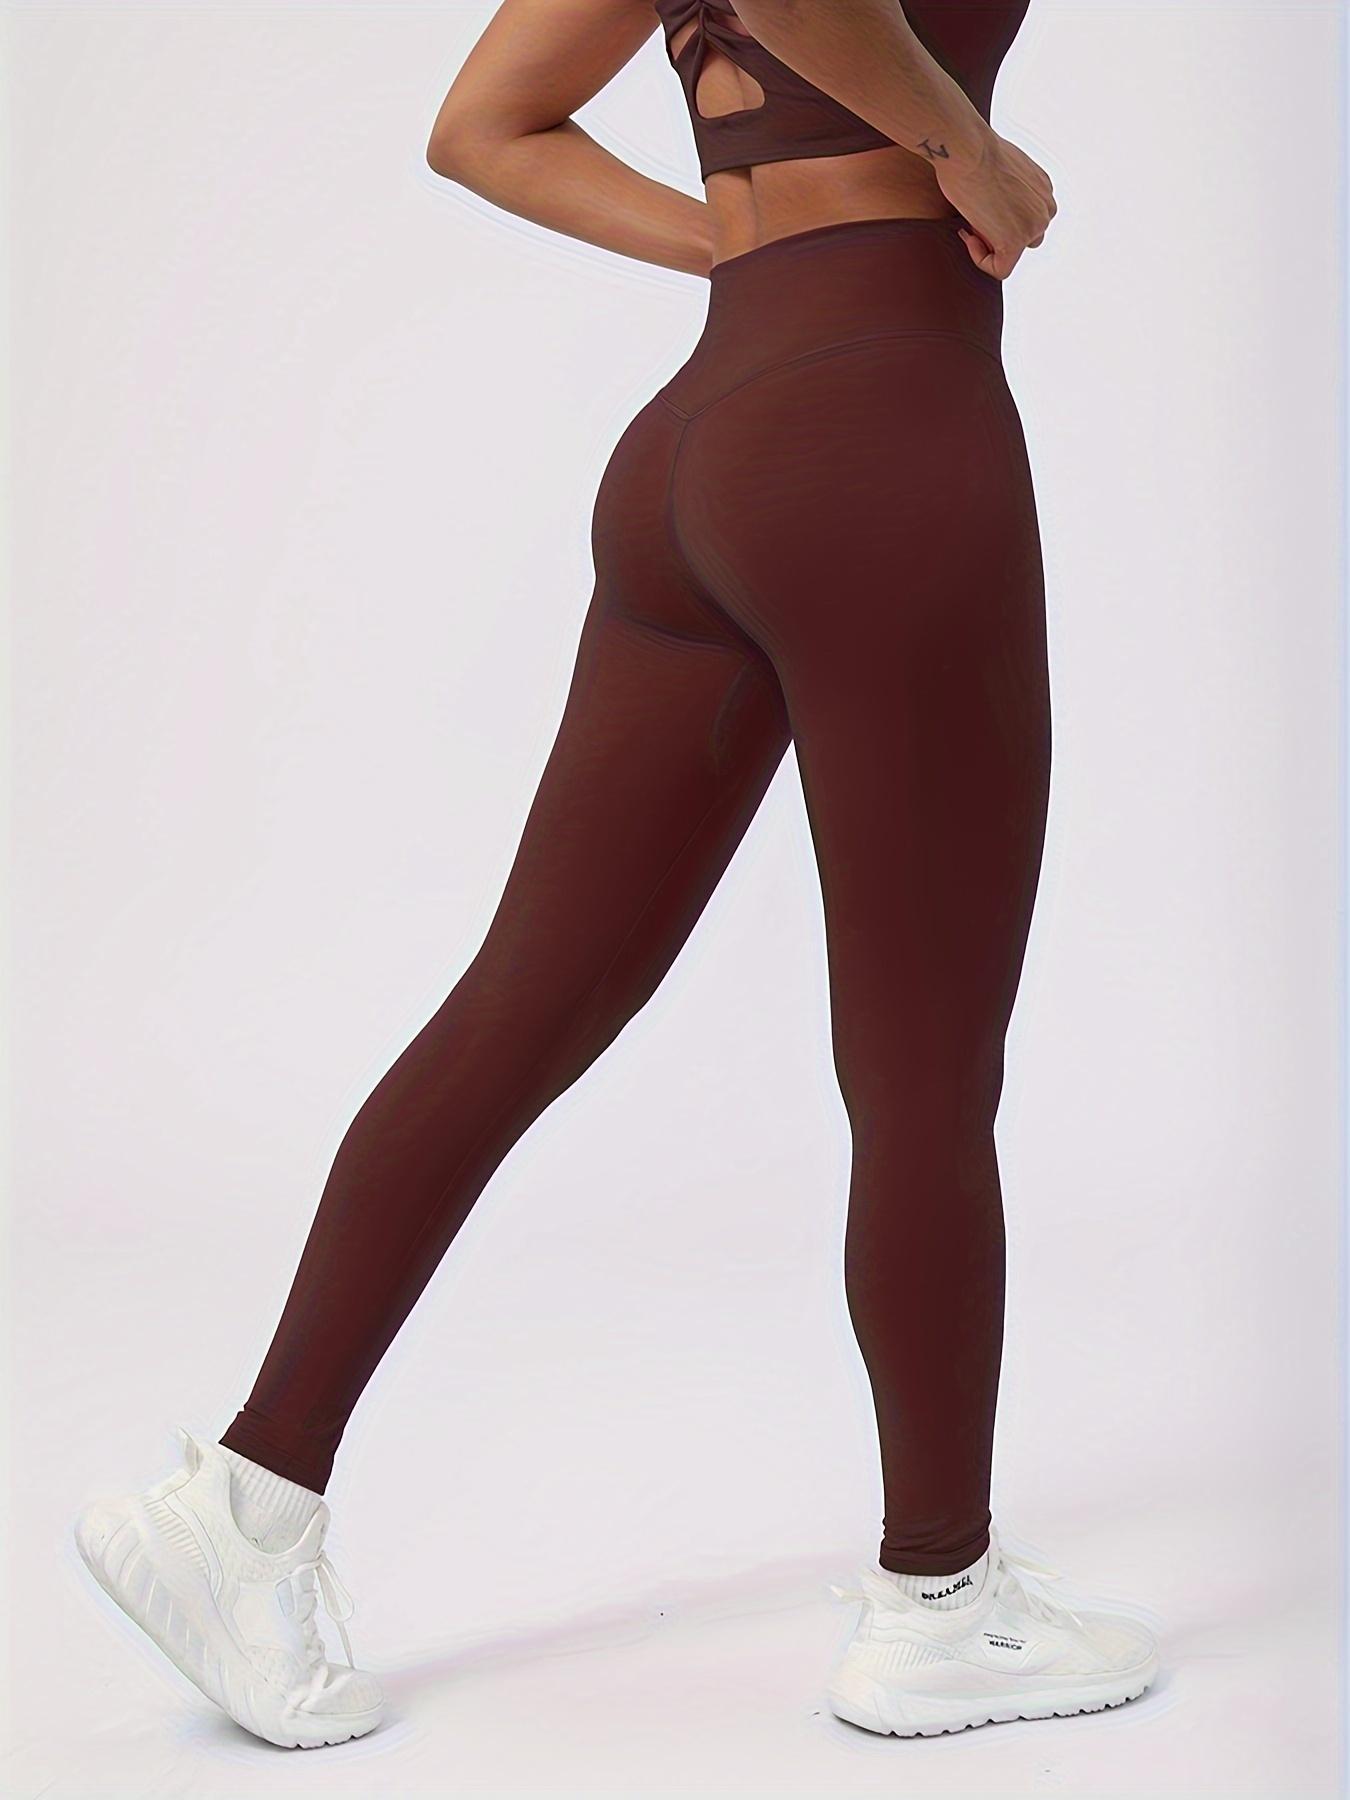 Brown Colour Stretchable Sports Leggings